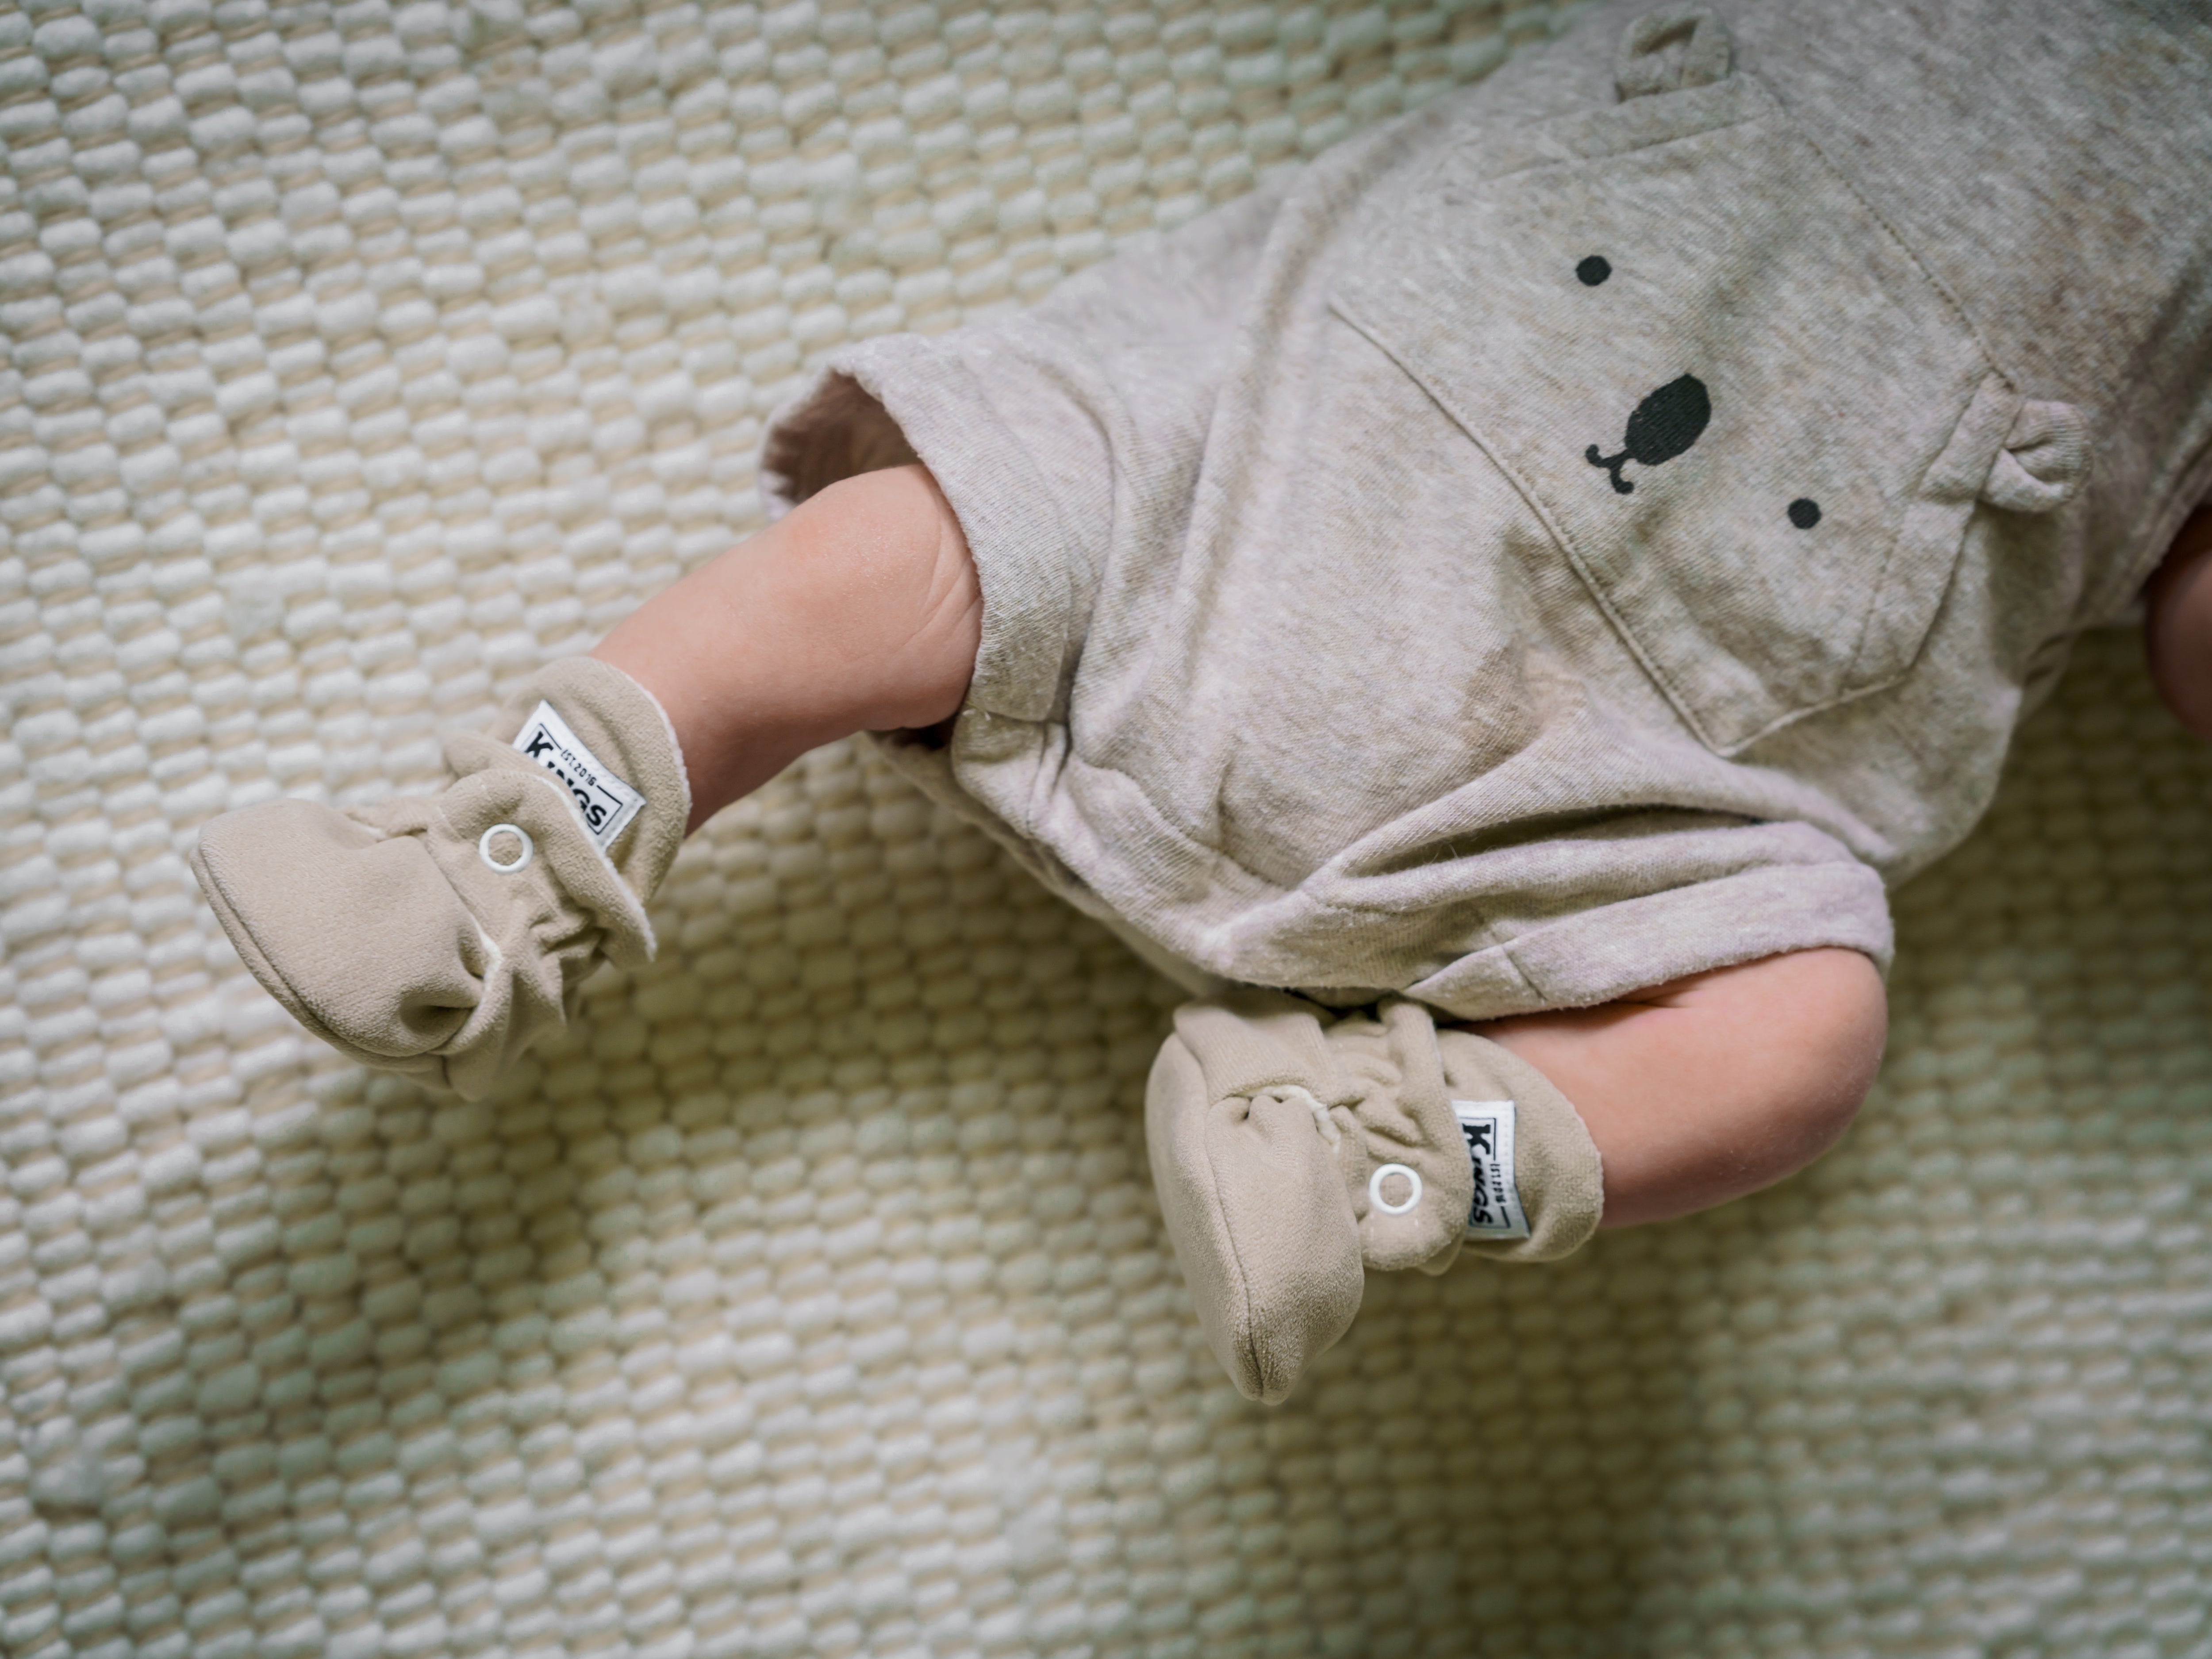 King & Rebels - Gamuza Classic Babyboots in Ivory